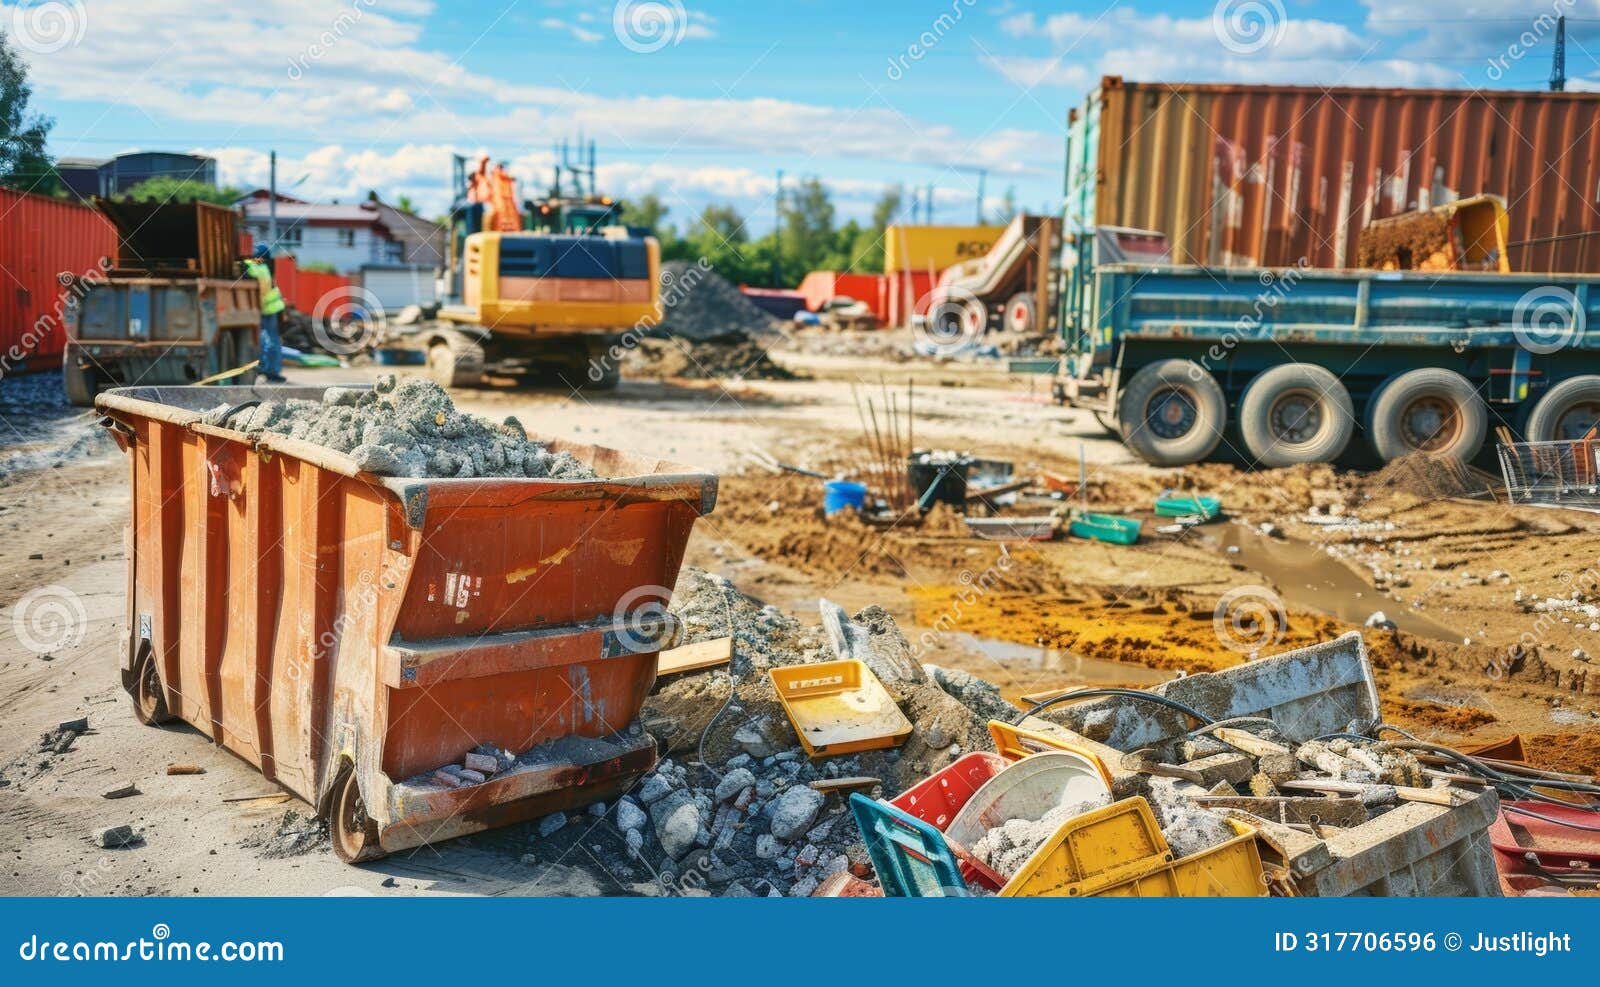 a ated area on the construction site where workers can store and efficiently dispose of excess materials to